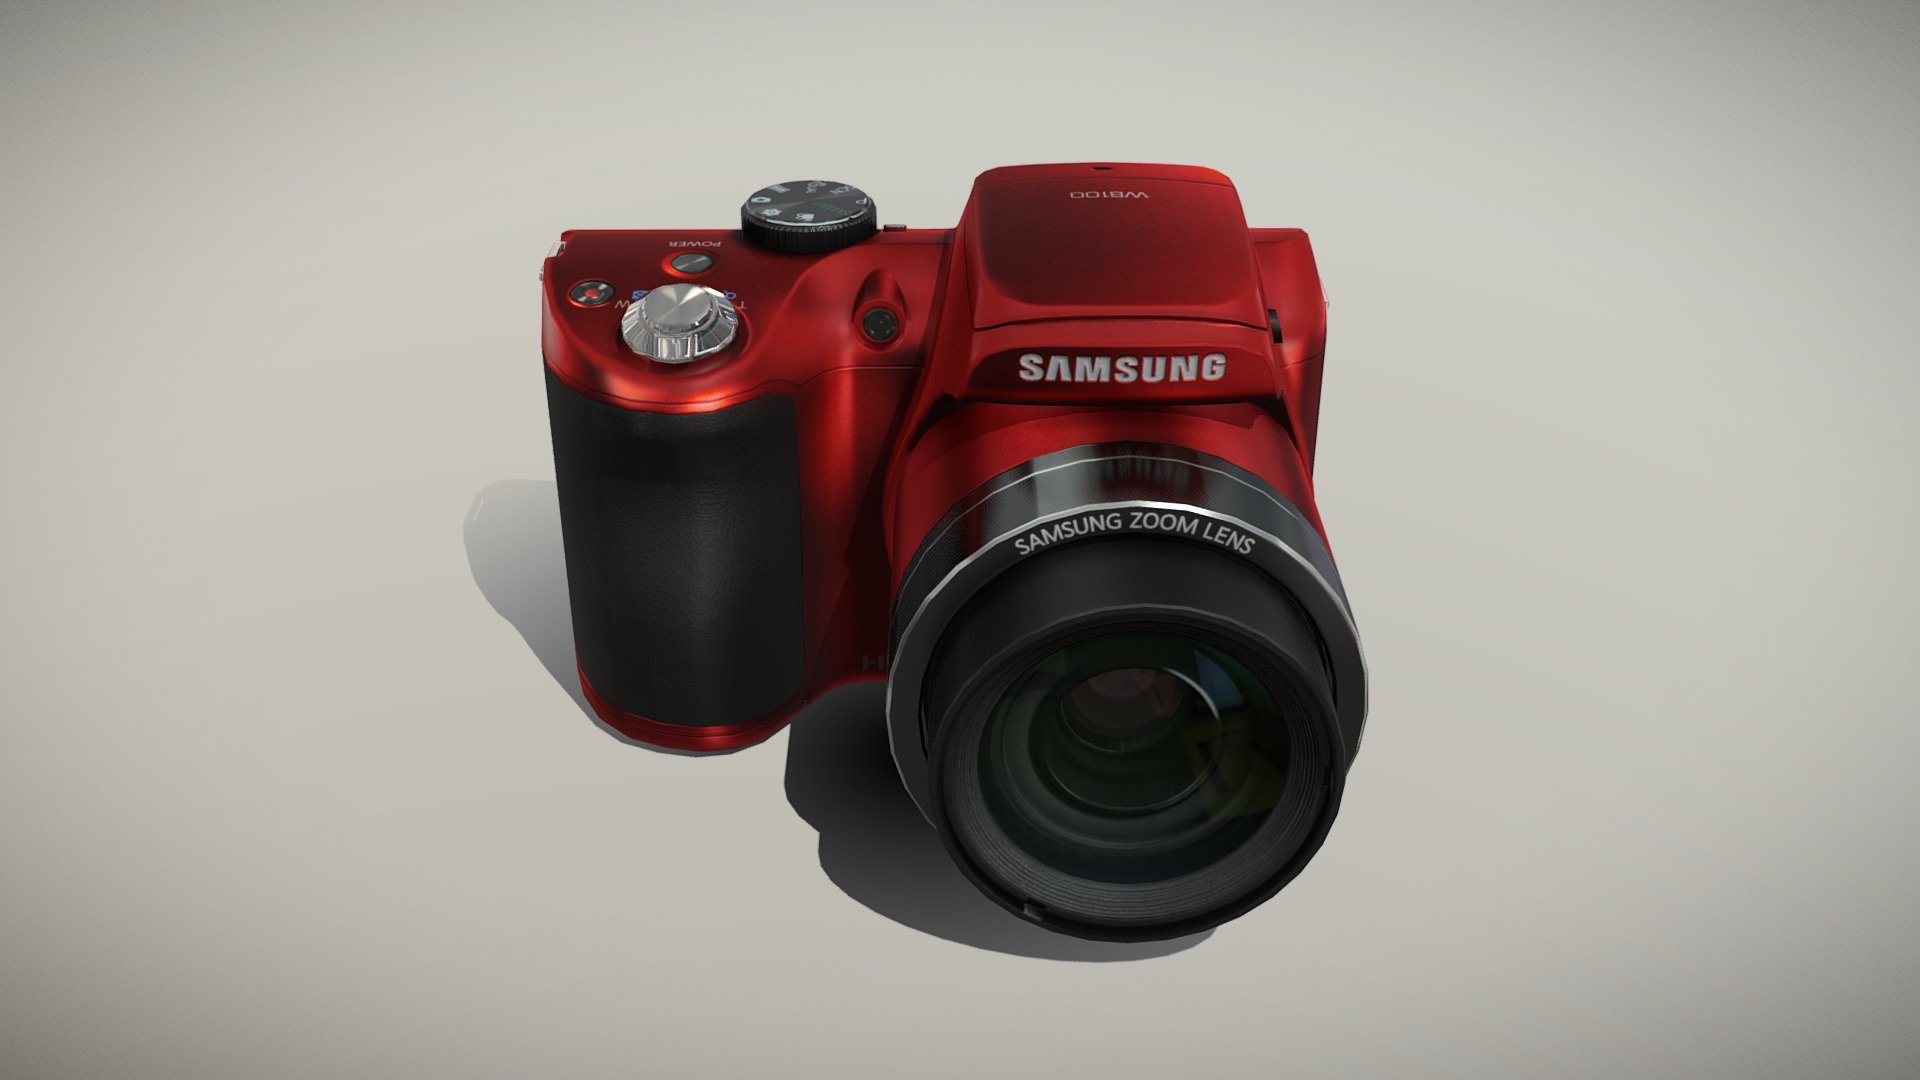 •   Let me present to you high-quality low-poly 3D model Samsung WB100 Red. Modeling was made with ortho-photos of real camera that is why all details of design are recreated most authentically.

•    This model consists of a few meshes, it is low-polygonal and it has only two materials (for Body and Glass of Lens).

•   The total of the main textures is 5. Resolution of all textures is 4096 pixels square aspect ratio in .png format. Also there is original texture file .PSD format in separate archive.

•   Polygon count of the model is – 5885.

•   The model has correct dimensions in real-world scale. All parts grouped and named correctly.

•   To use the model in other 3D programs there are scenes saved in formats .fbx, .obj, .DAE, .max (2010 version).

Note: If you see some artifacts on the textures, it means compression works in the Viewer. We recommend setting HD quality for textures. But anyway, original textures have no artifacts 3d model